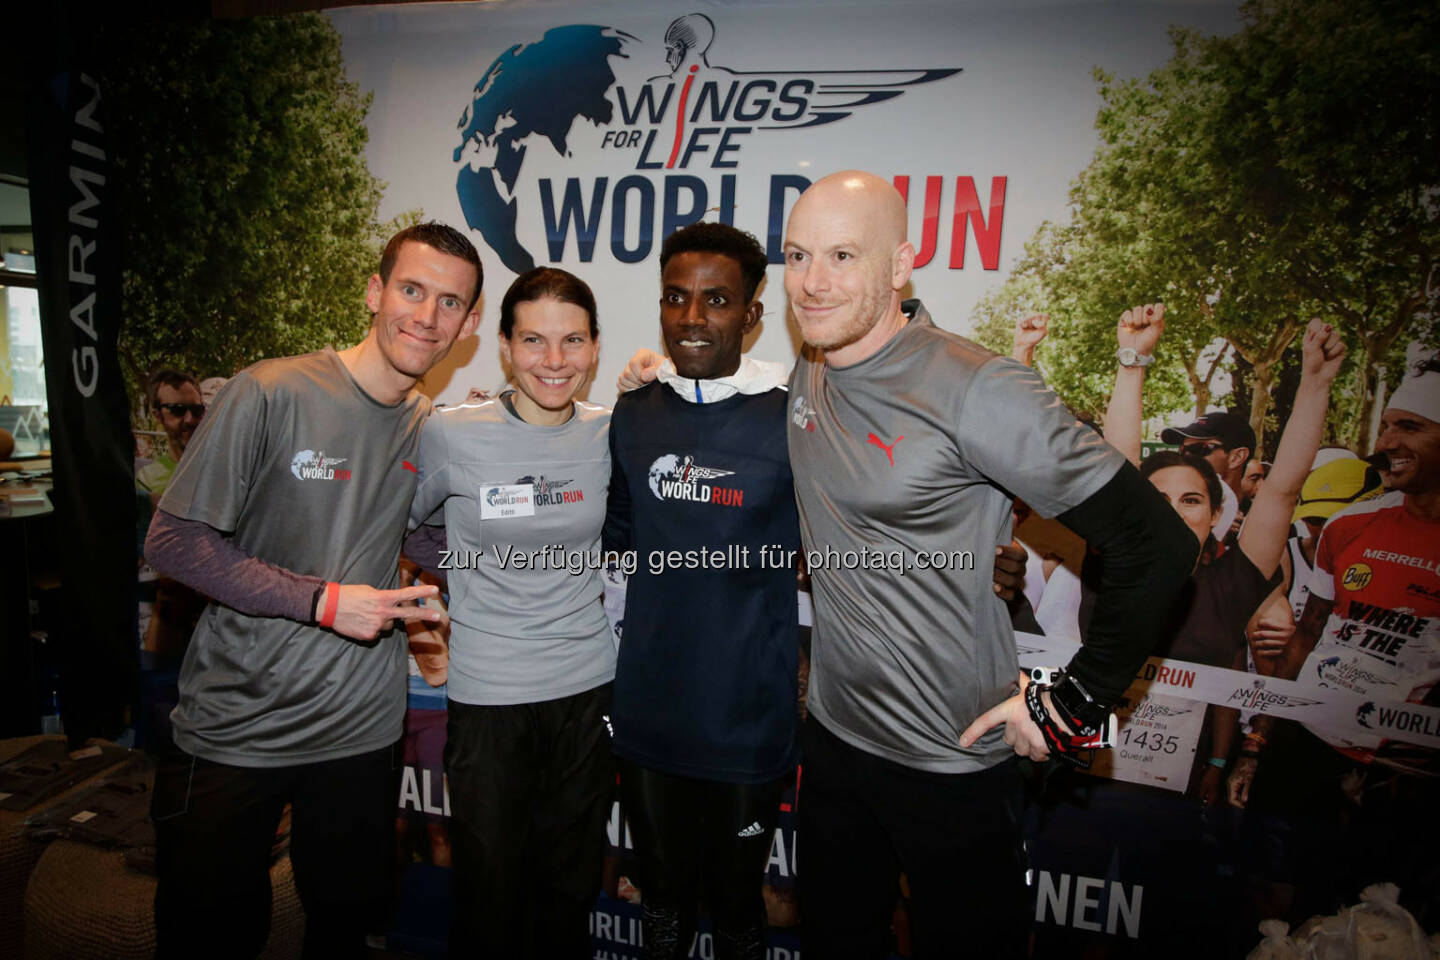 Participants at the Wings for Life World Run event in Munich 23rd of January 2016, Thomas Rottenberg on the right  (Bild: Daniel Grund)